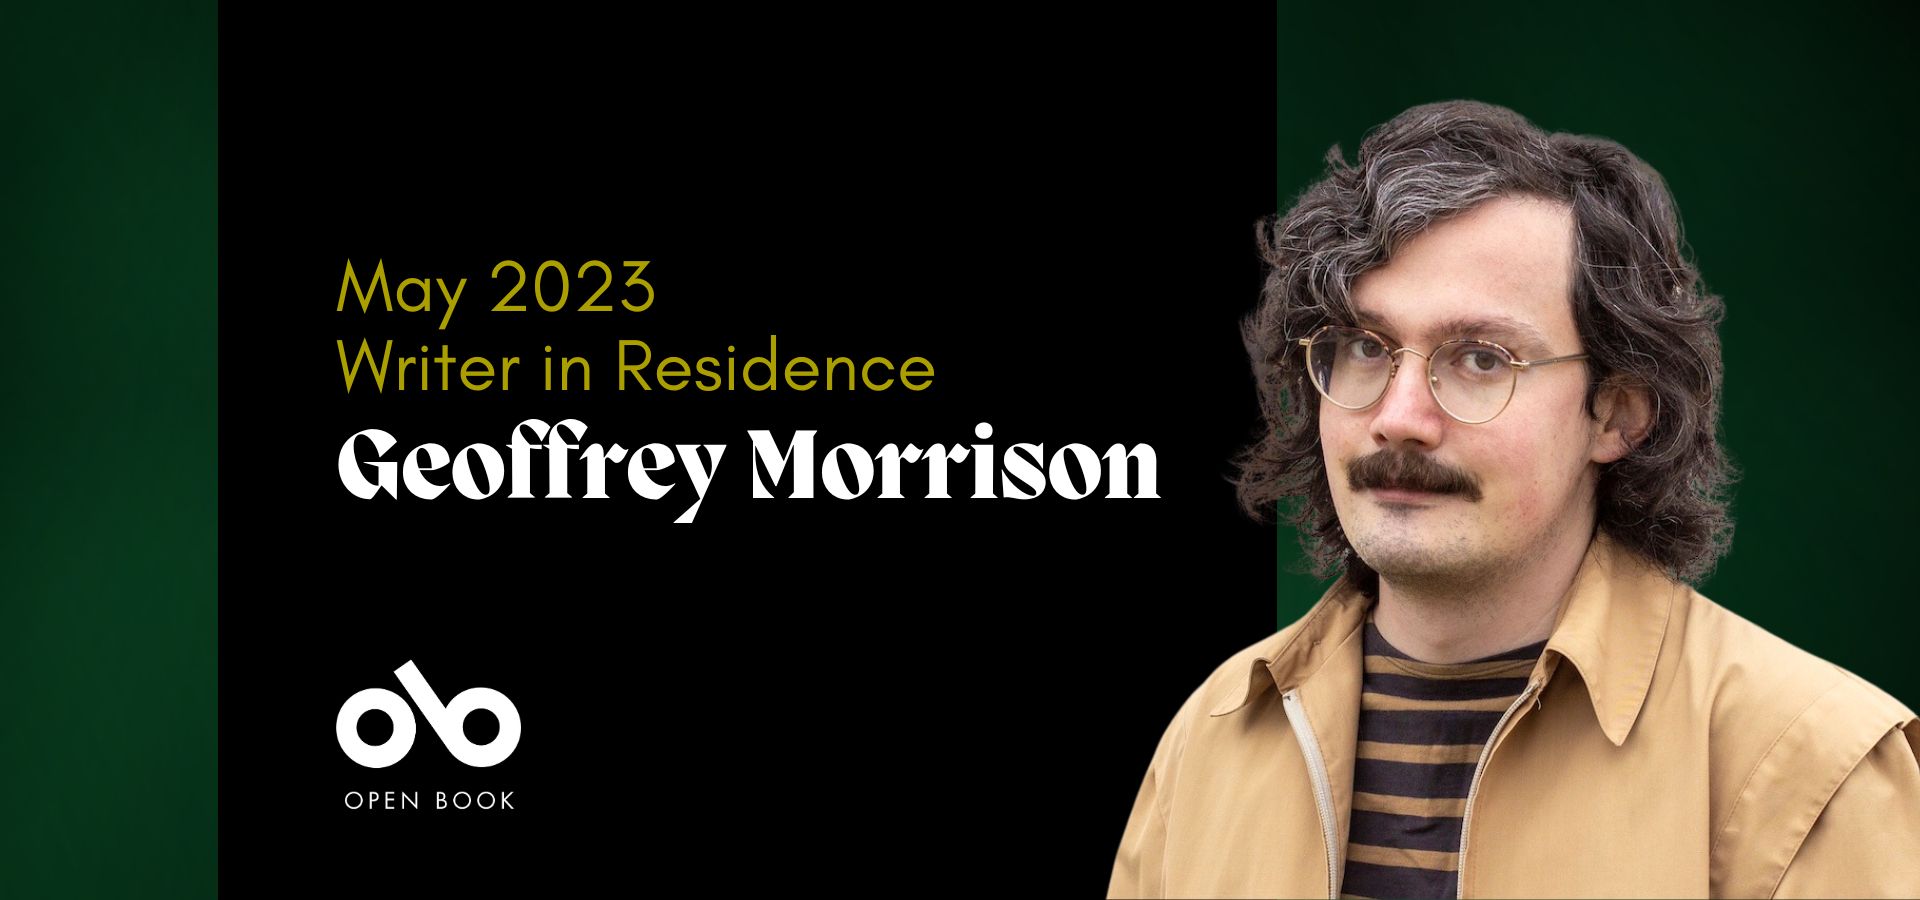 green and black banner image with photo of author Geoffrey Morrison and text reading "May 2023 Writer in Residence Geoffrey Morrison"